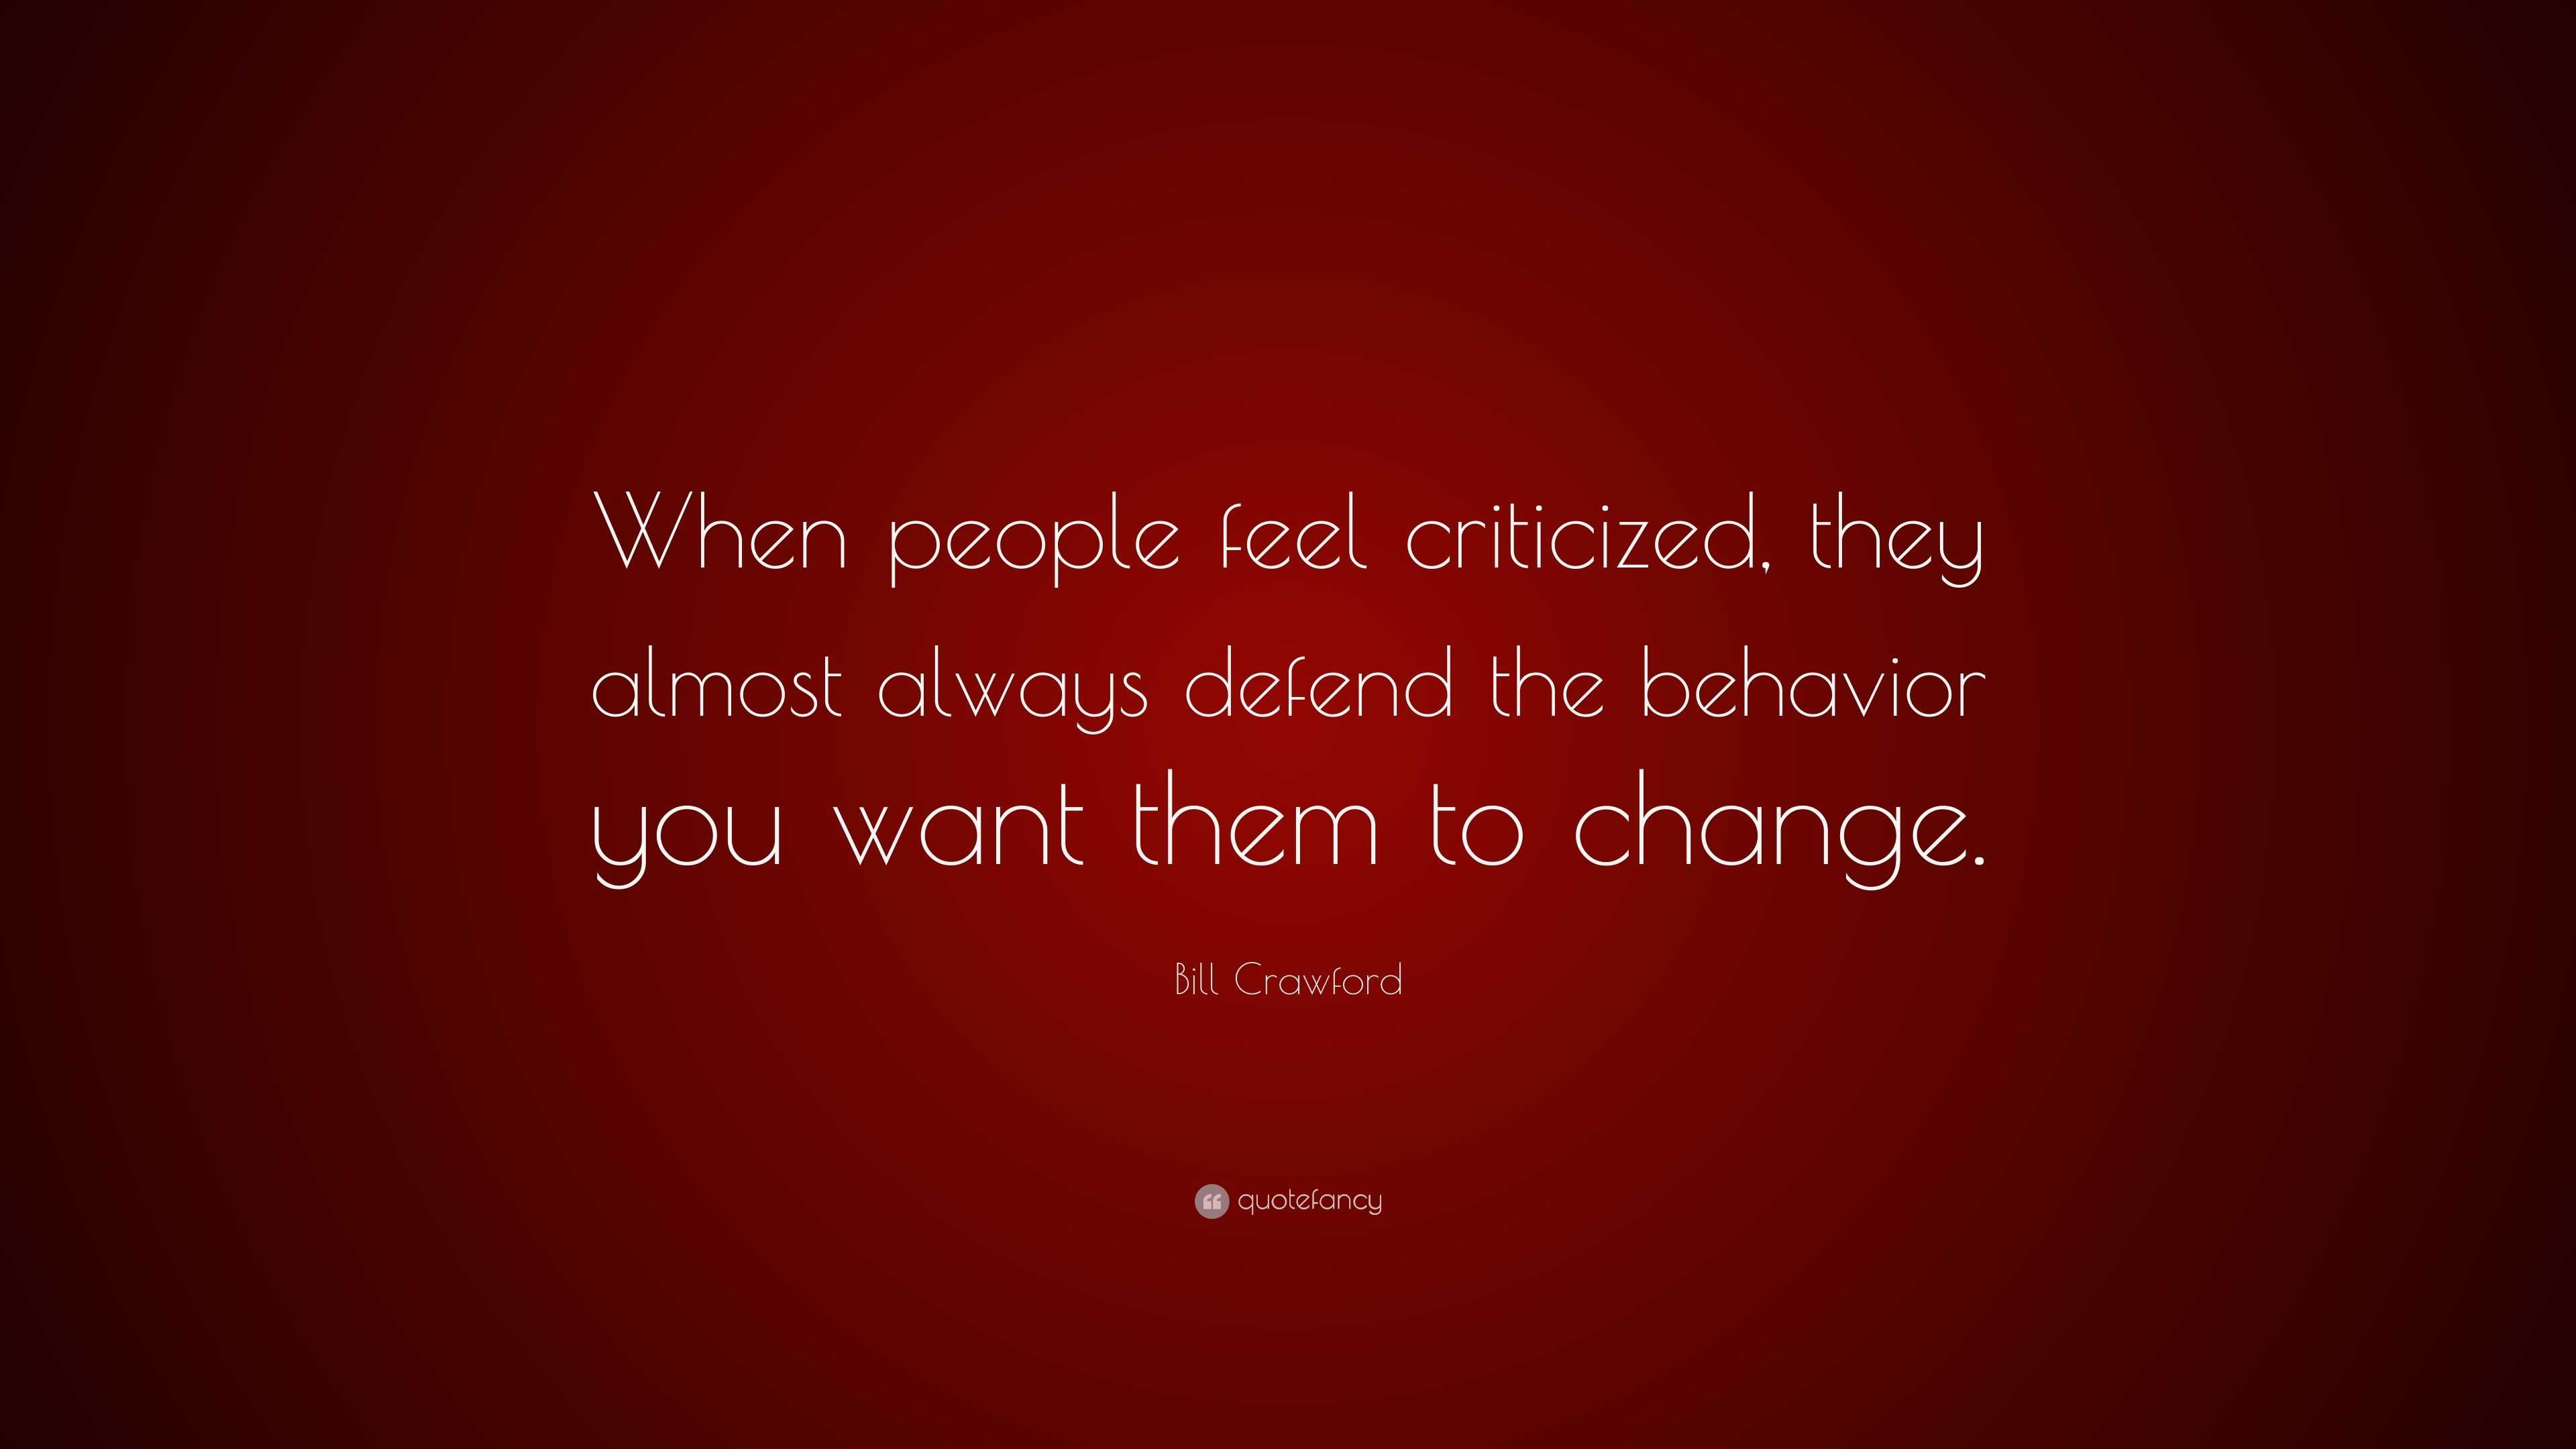 Bill Crawford Quote: “When people feel criticized, they almost always ...